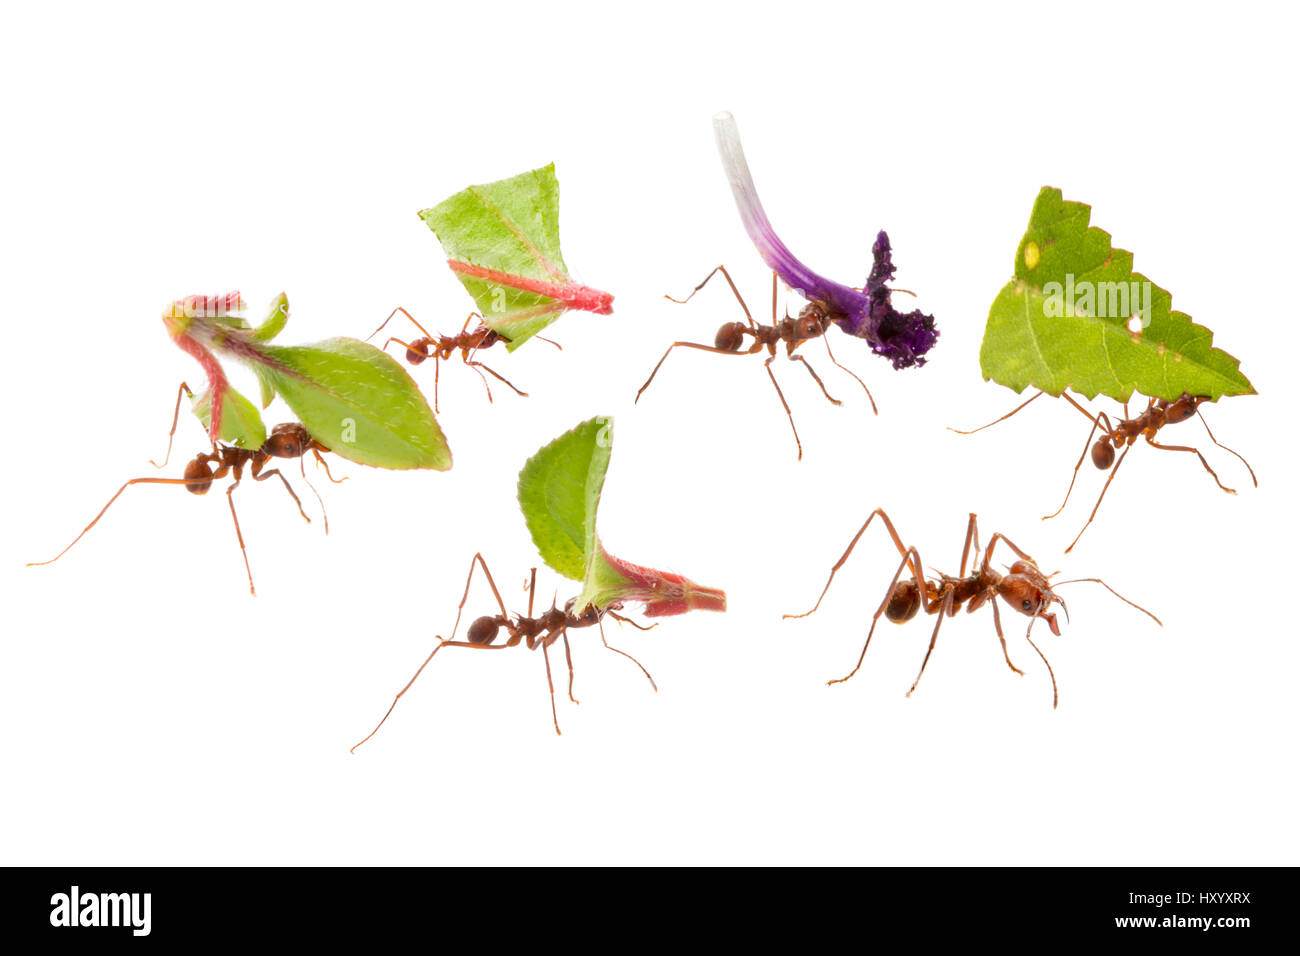 Leaf-cutter Ants (Atta cephalotes) carrying harvested leaf to their nest. Osa Peninsula, Costa Rica. Composite image. Stock Photo